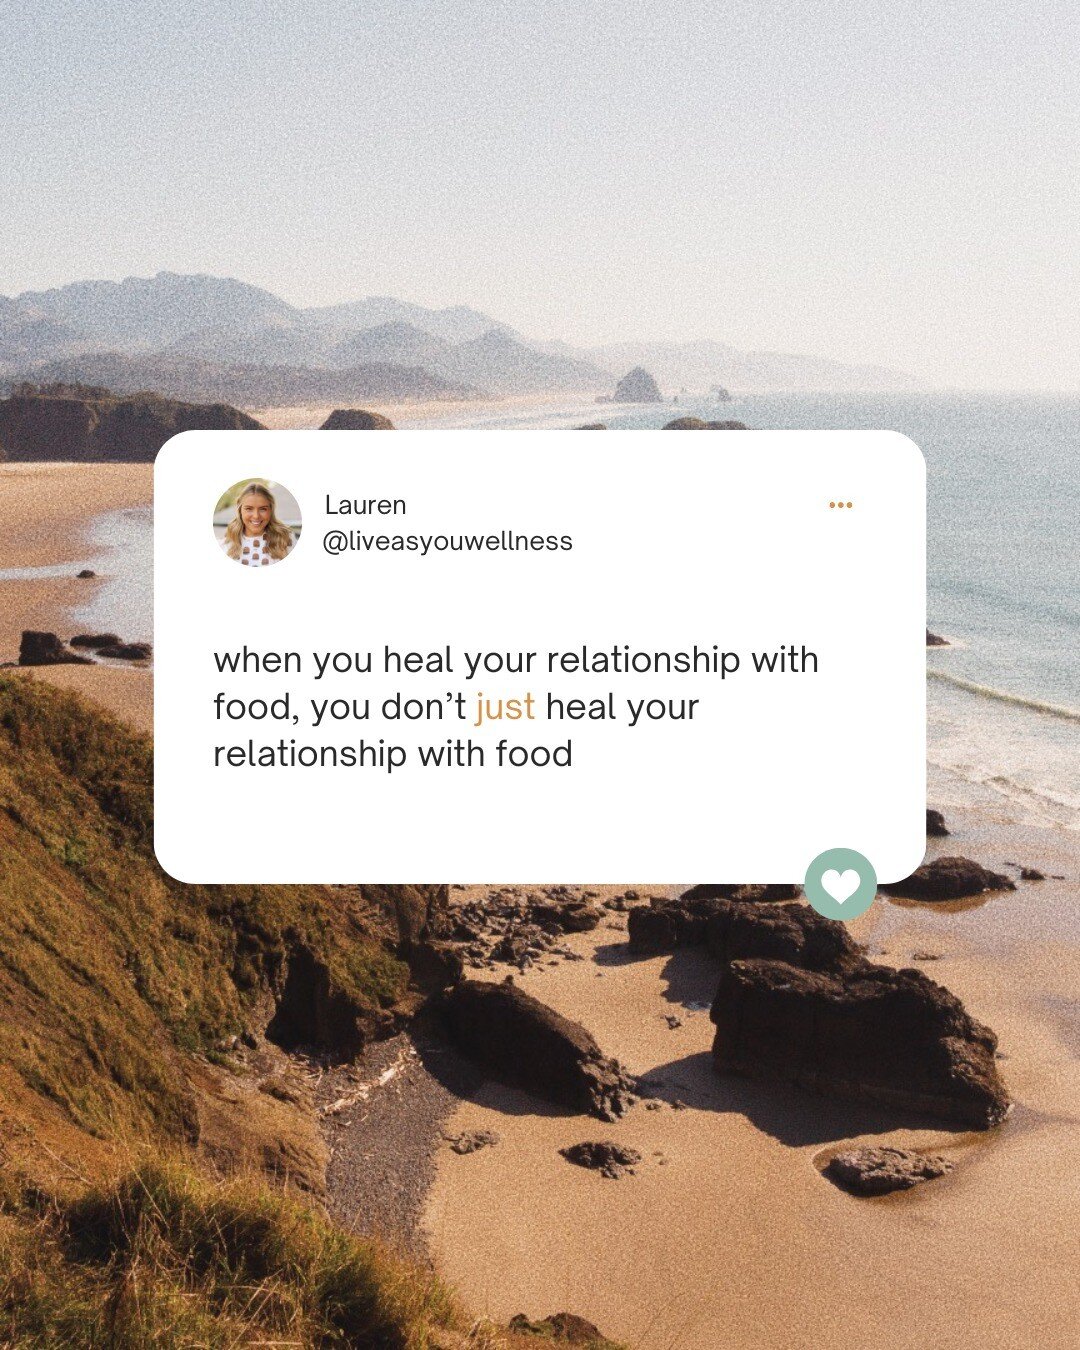 when you heal your relationship with food, you don&rsquo;t just heal your relationship with food.

🥐 when you heal your relationship with food, you get clearer on what it is you do and don&rsquo;t want out of life.

🥐 when you heal your relationshi